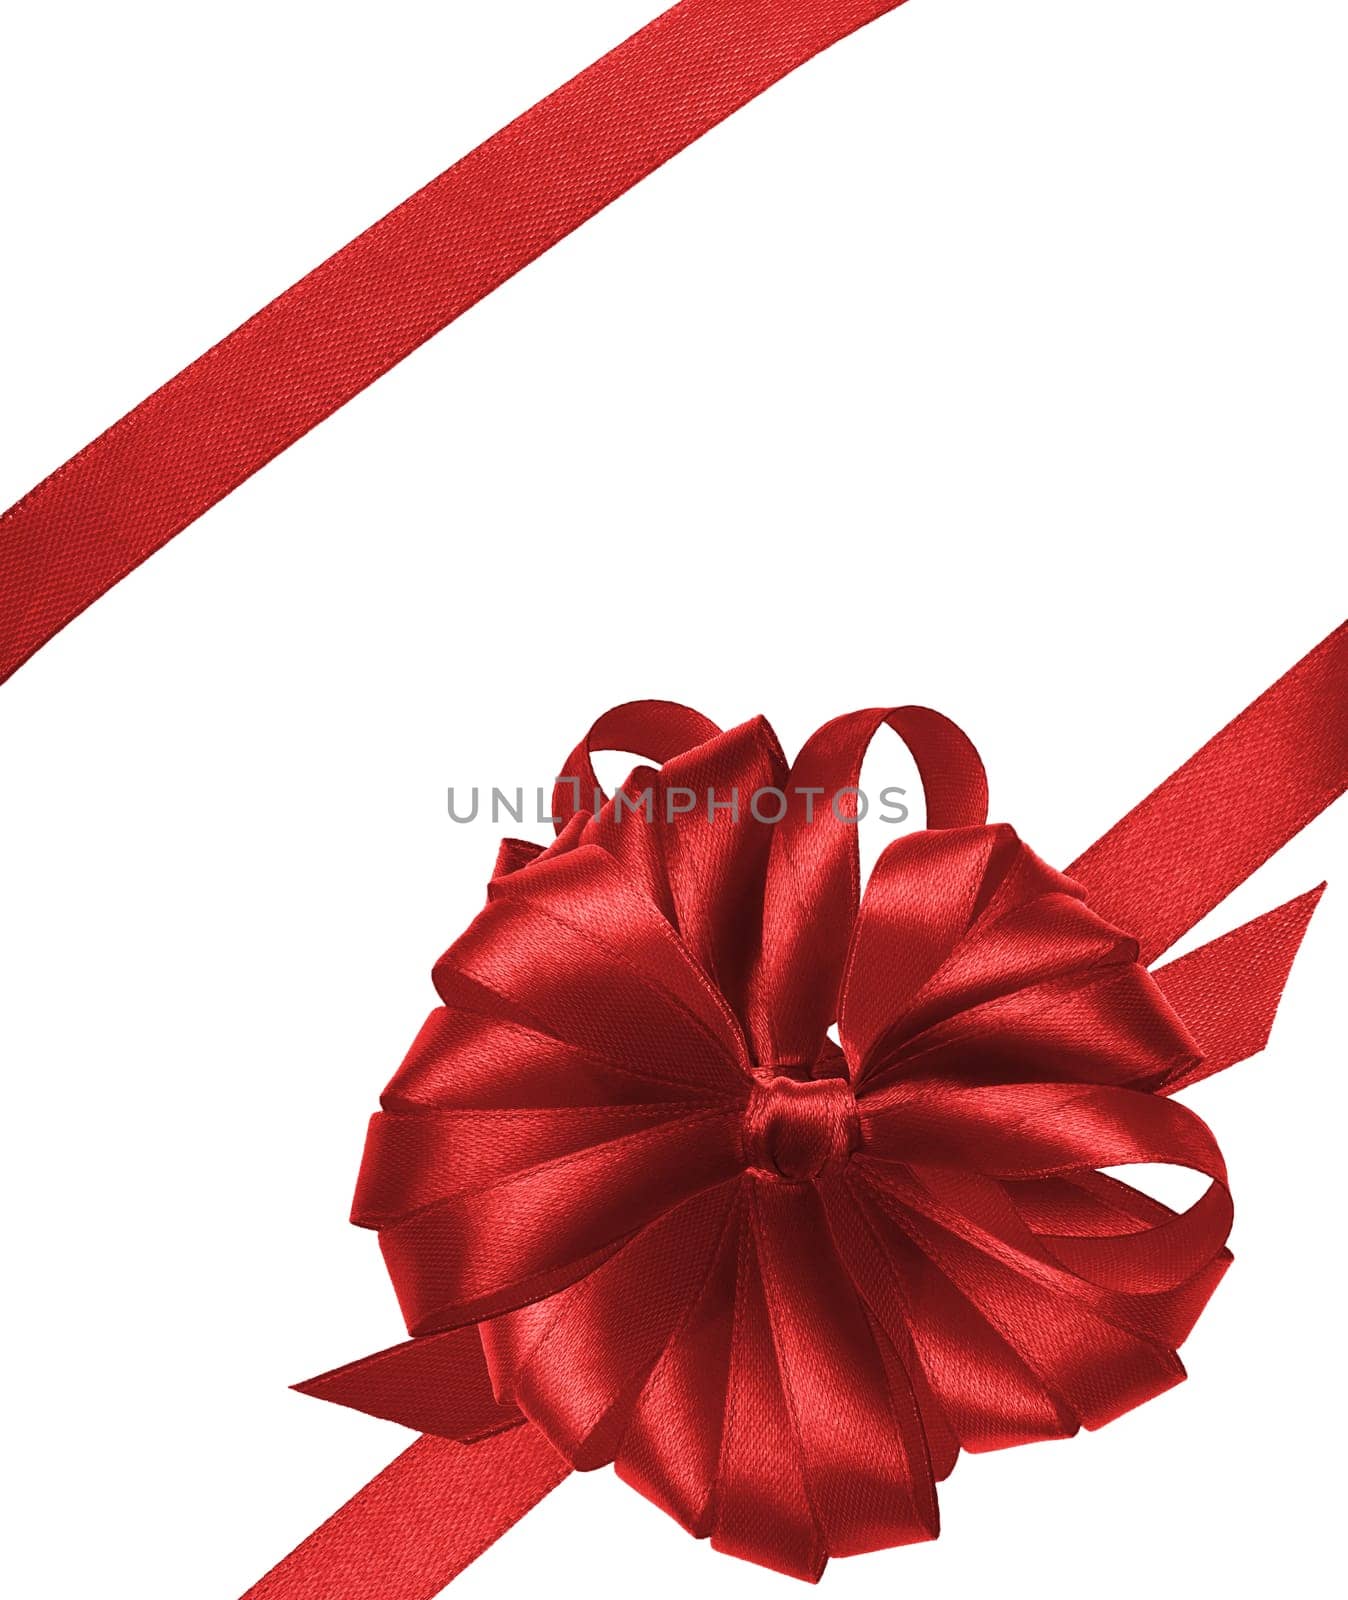 Tied bow made of red silk ribbon on an isolated background, decor for a gift